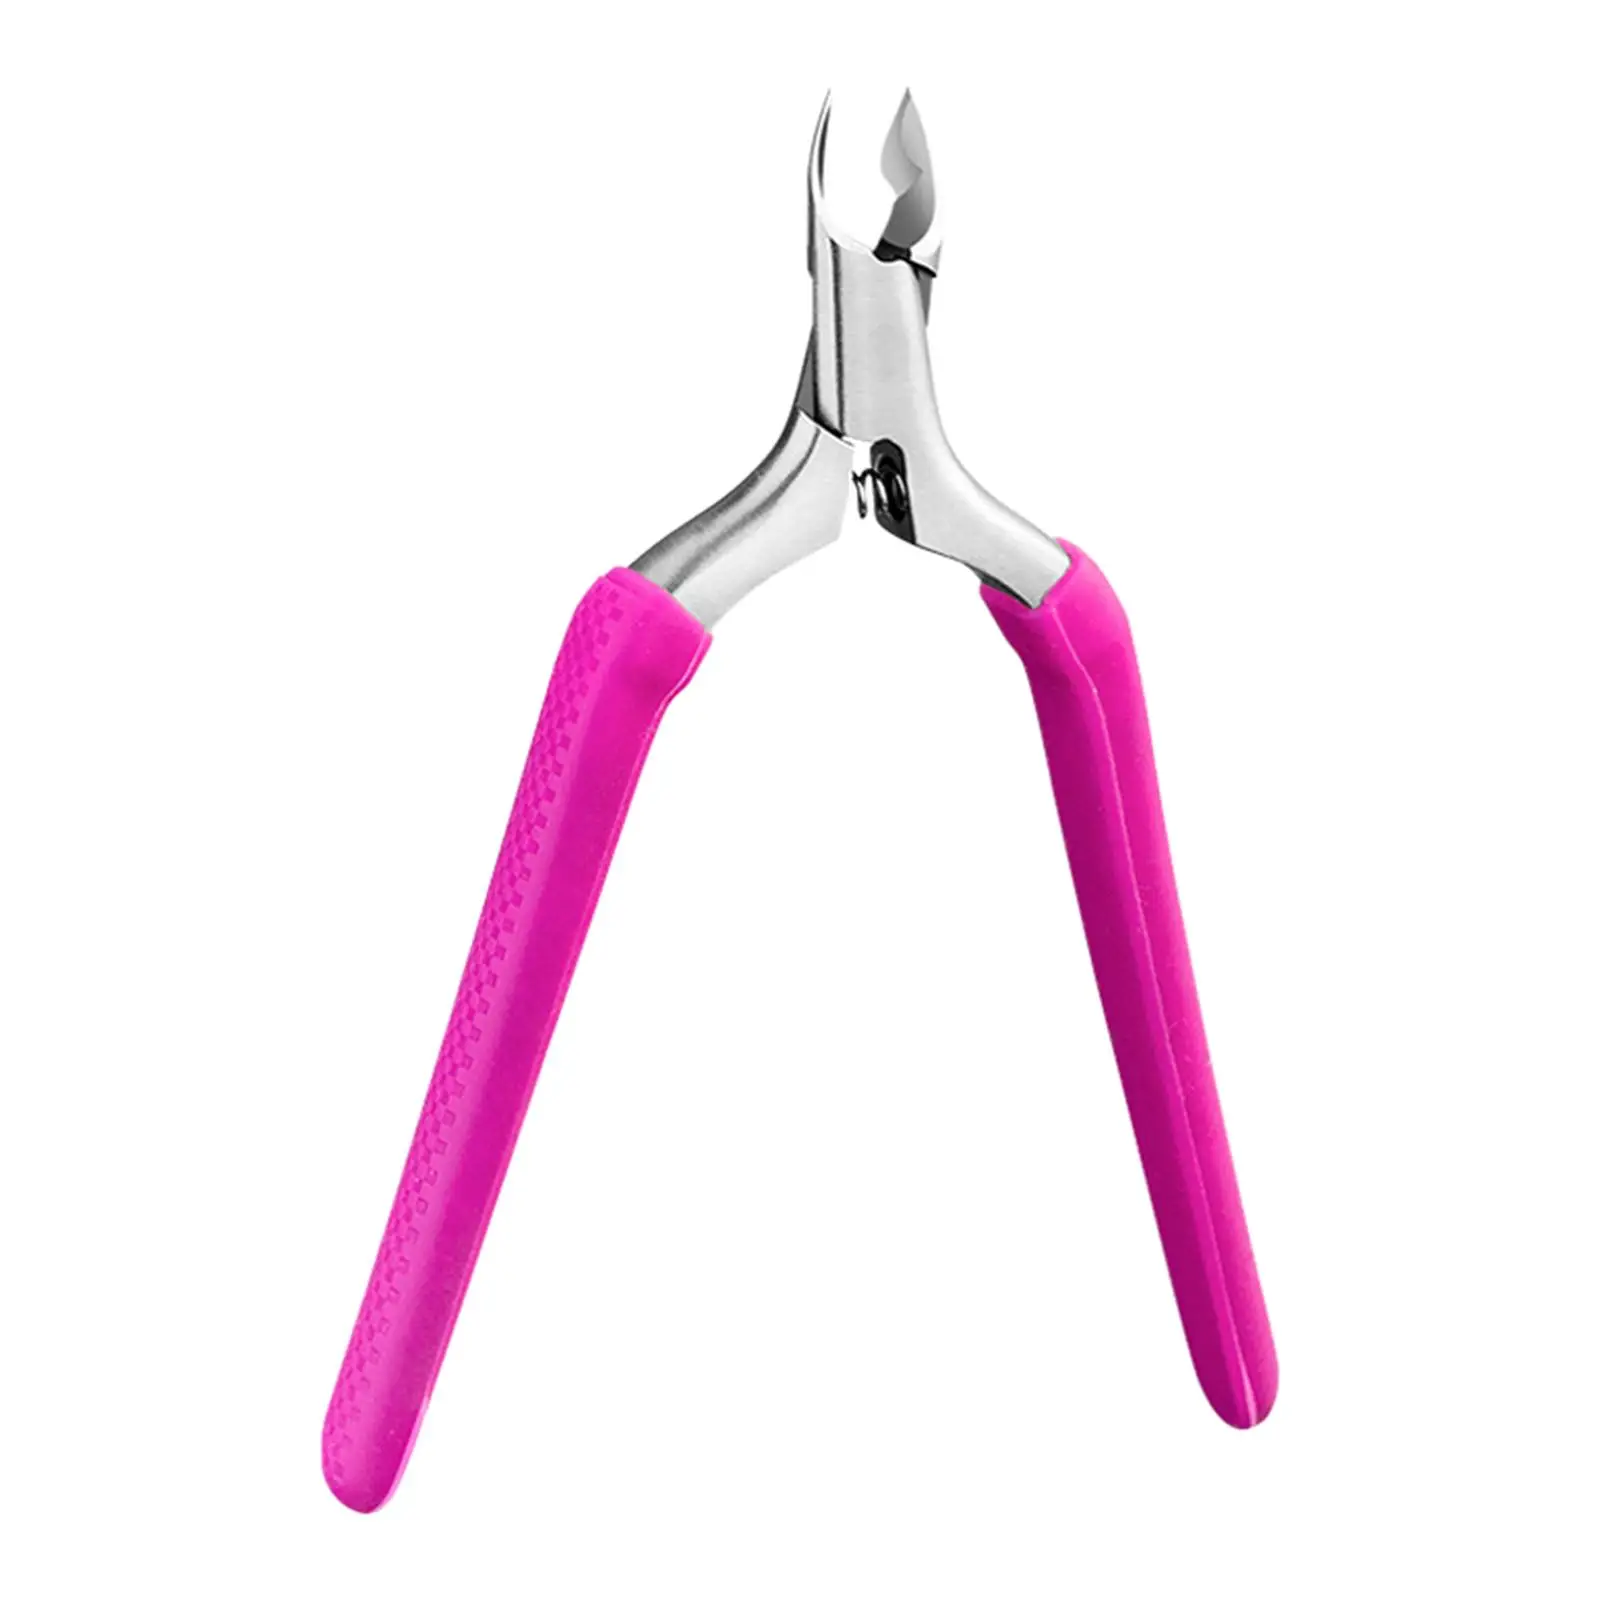 Cuticle Clipper Manicure Tool for Fingernails and Toenails Cuticle Cutter for Home